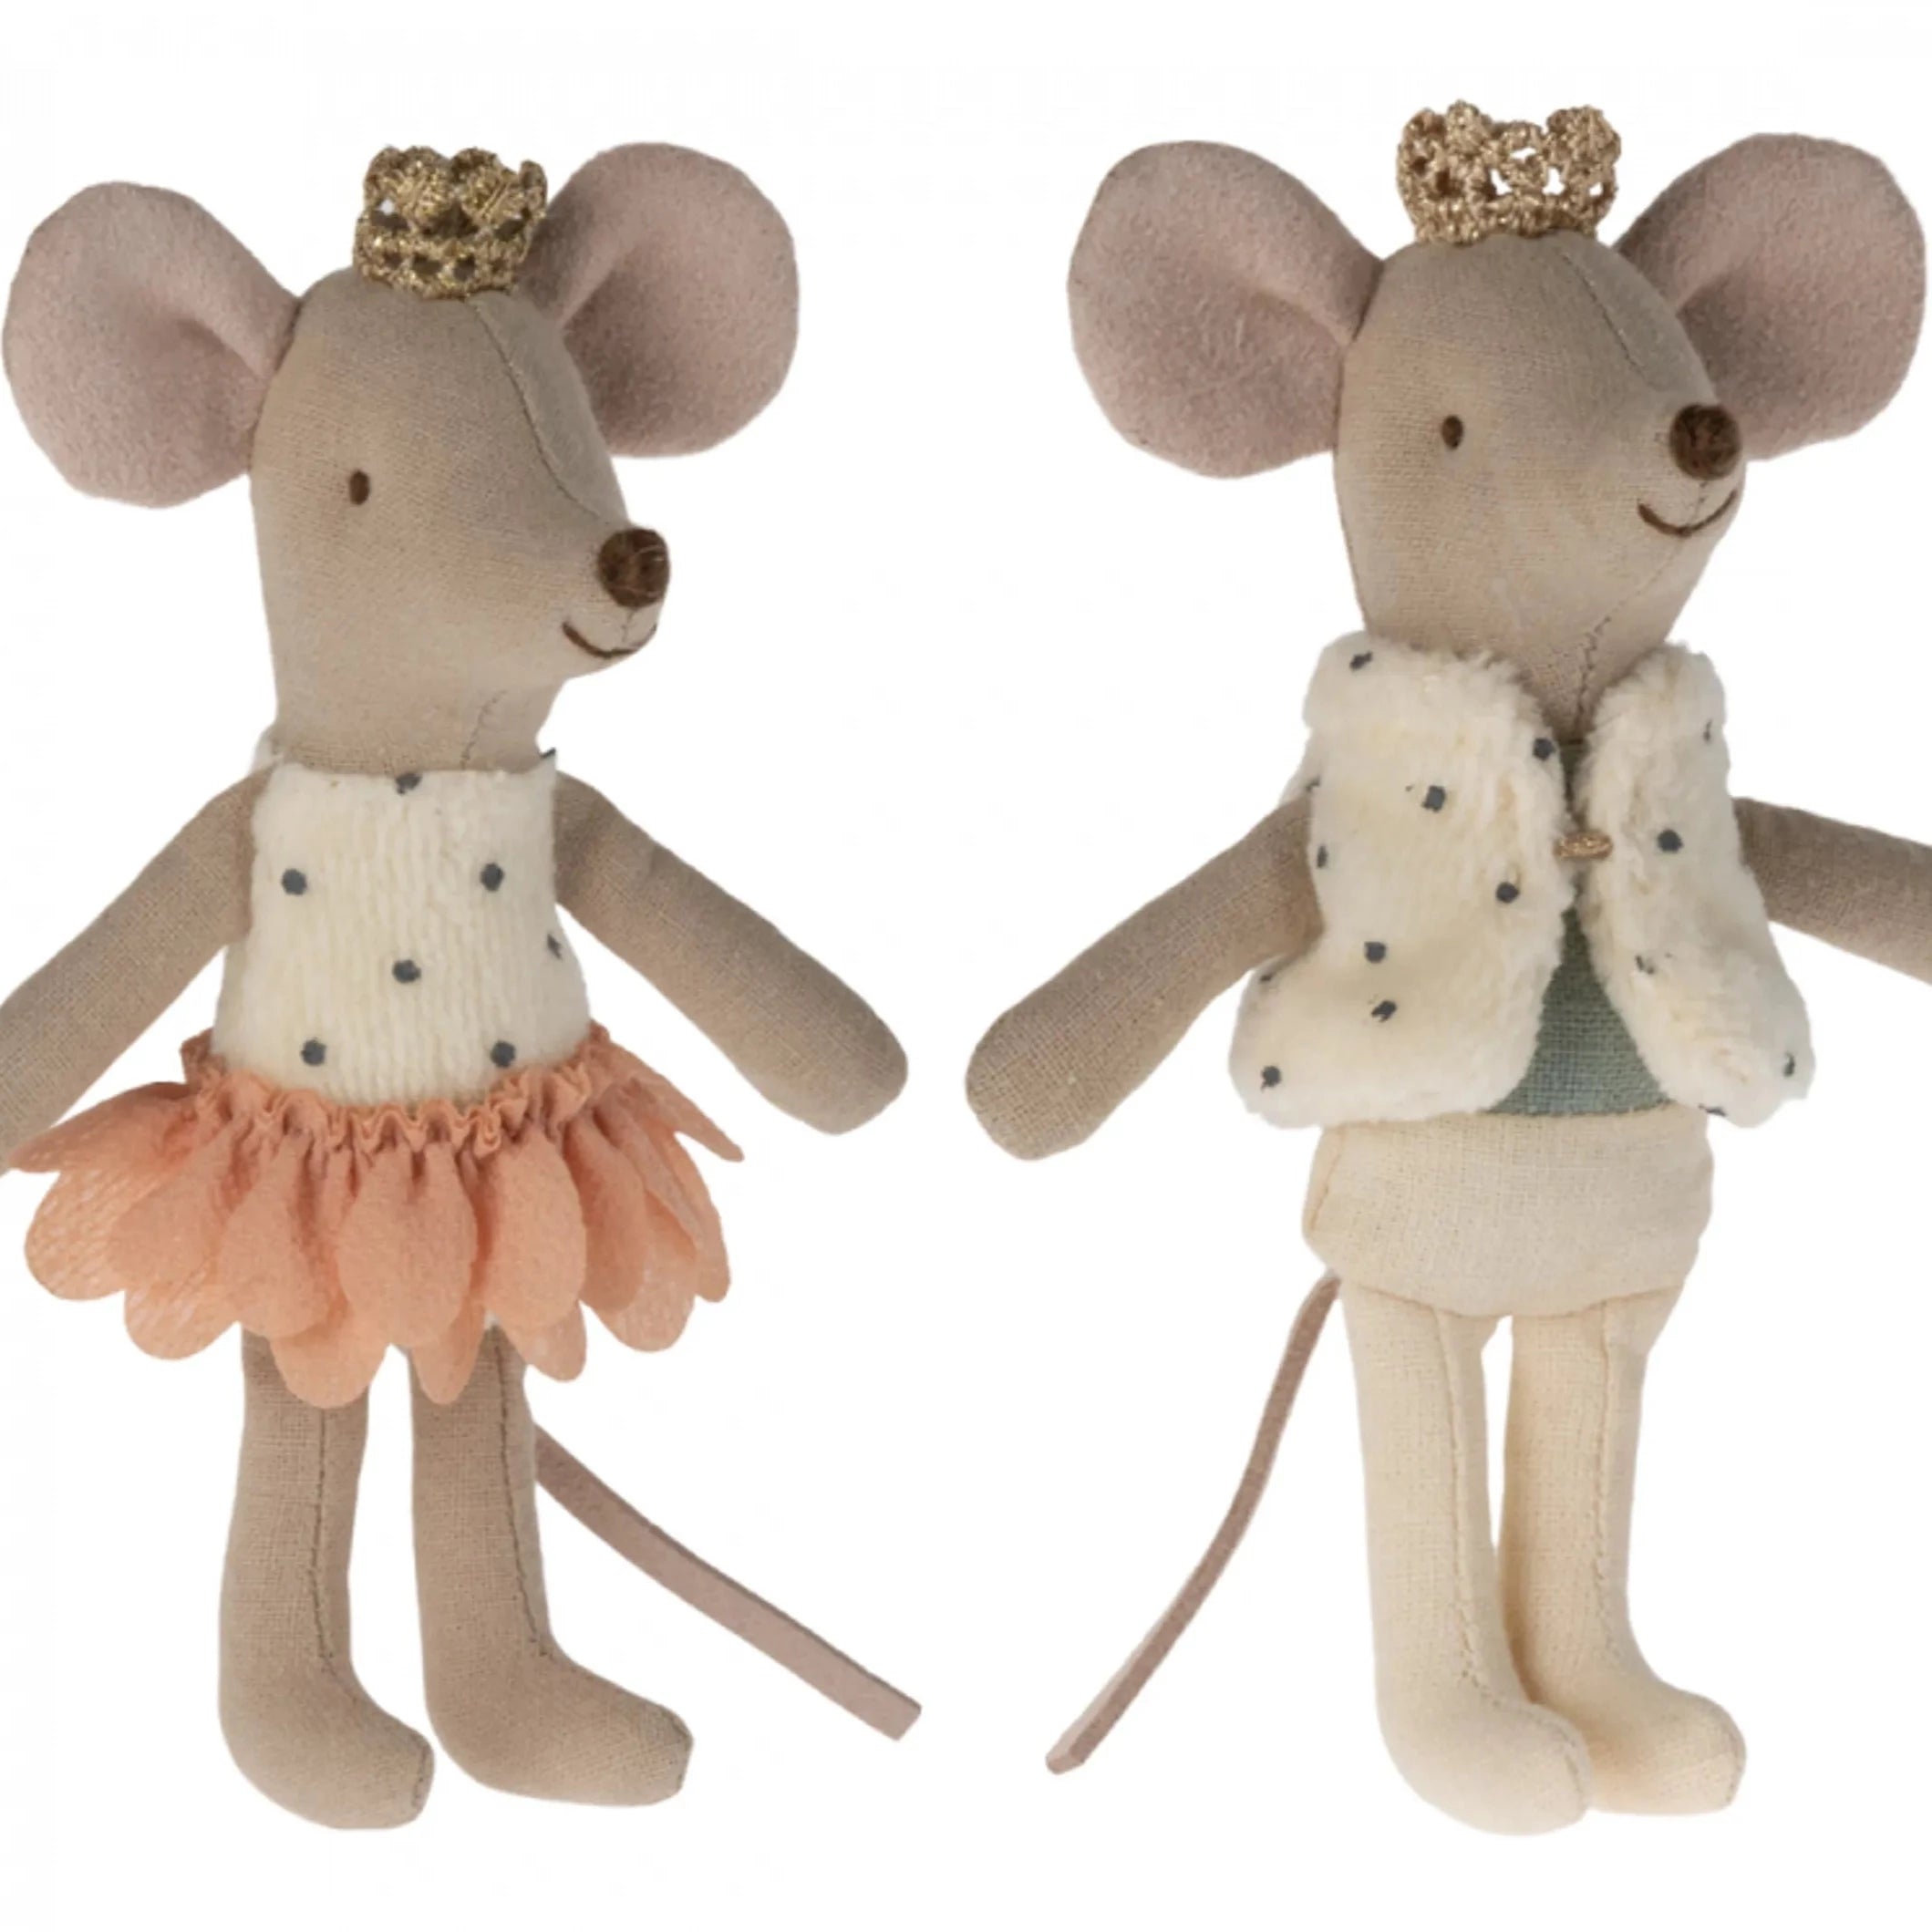 Maileg: Twins mice in the Royal Twins Micice In MatchBox 11 cm box